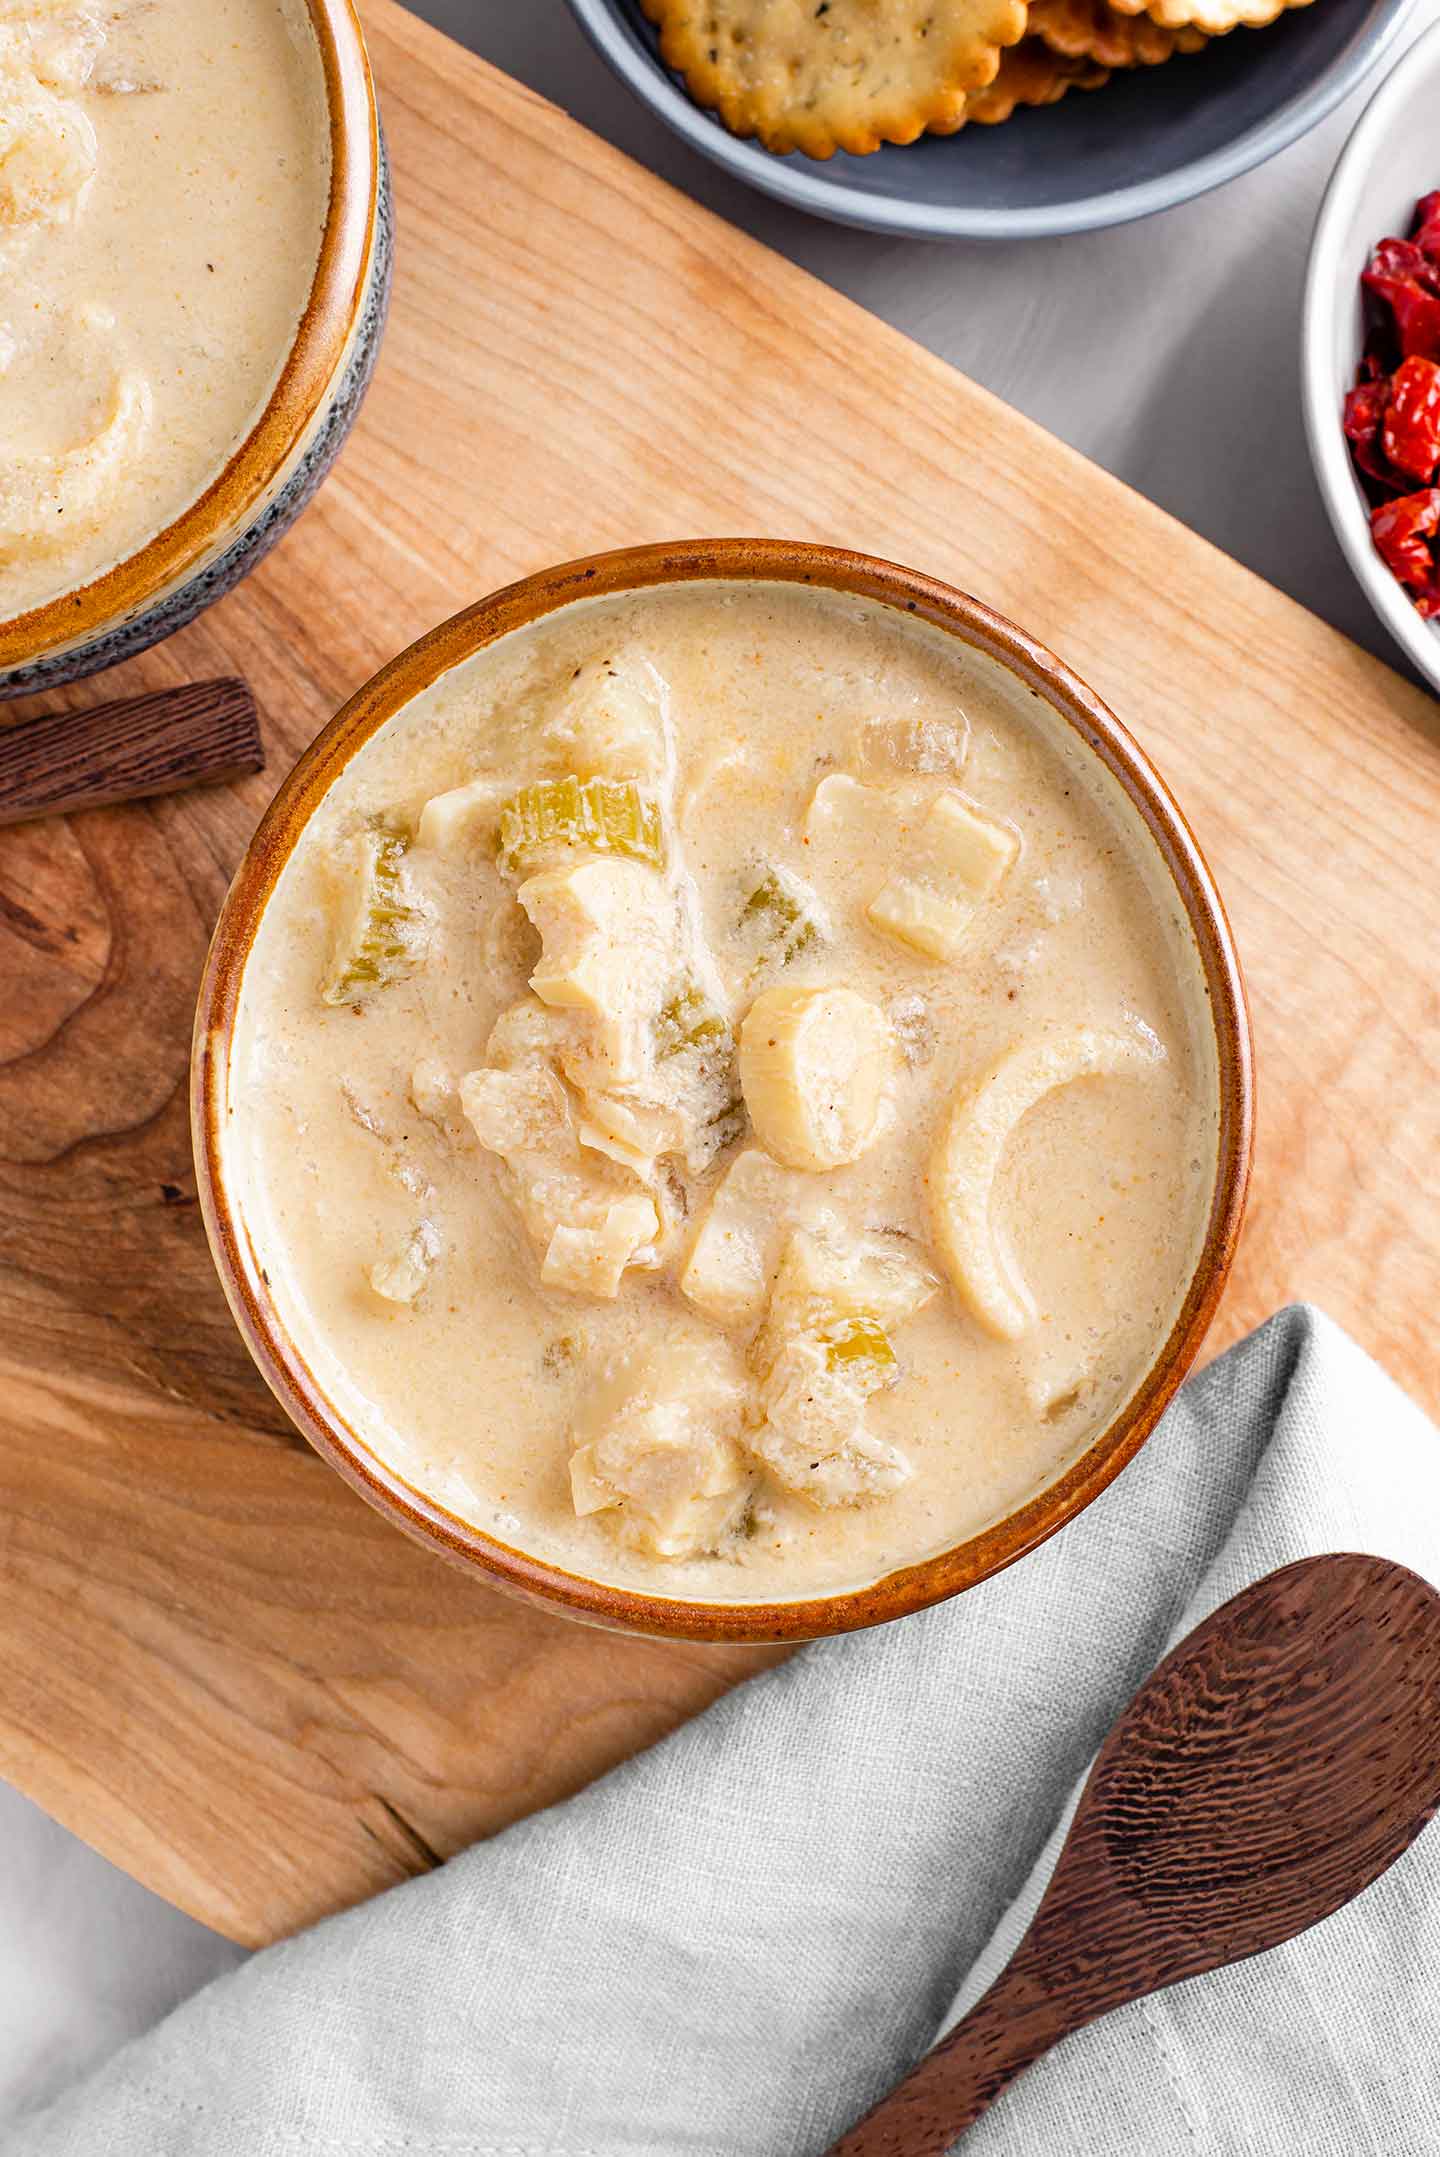 Top down view of creamy and chunky chowder in a bowl with a wooden spoon laying next to it. Another bowl of chowder is just visible as are crackers and sun-dried tomato bits.